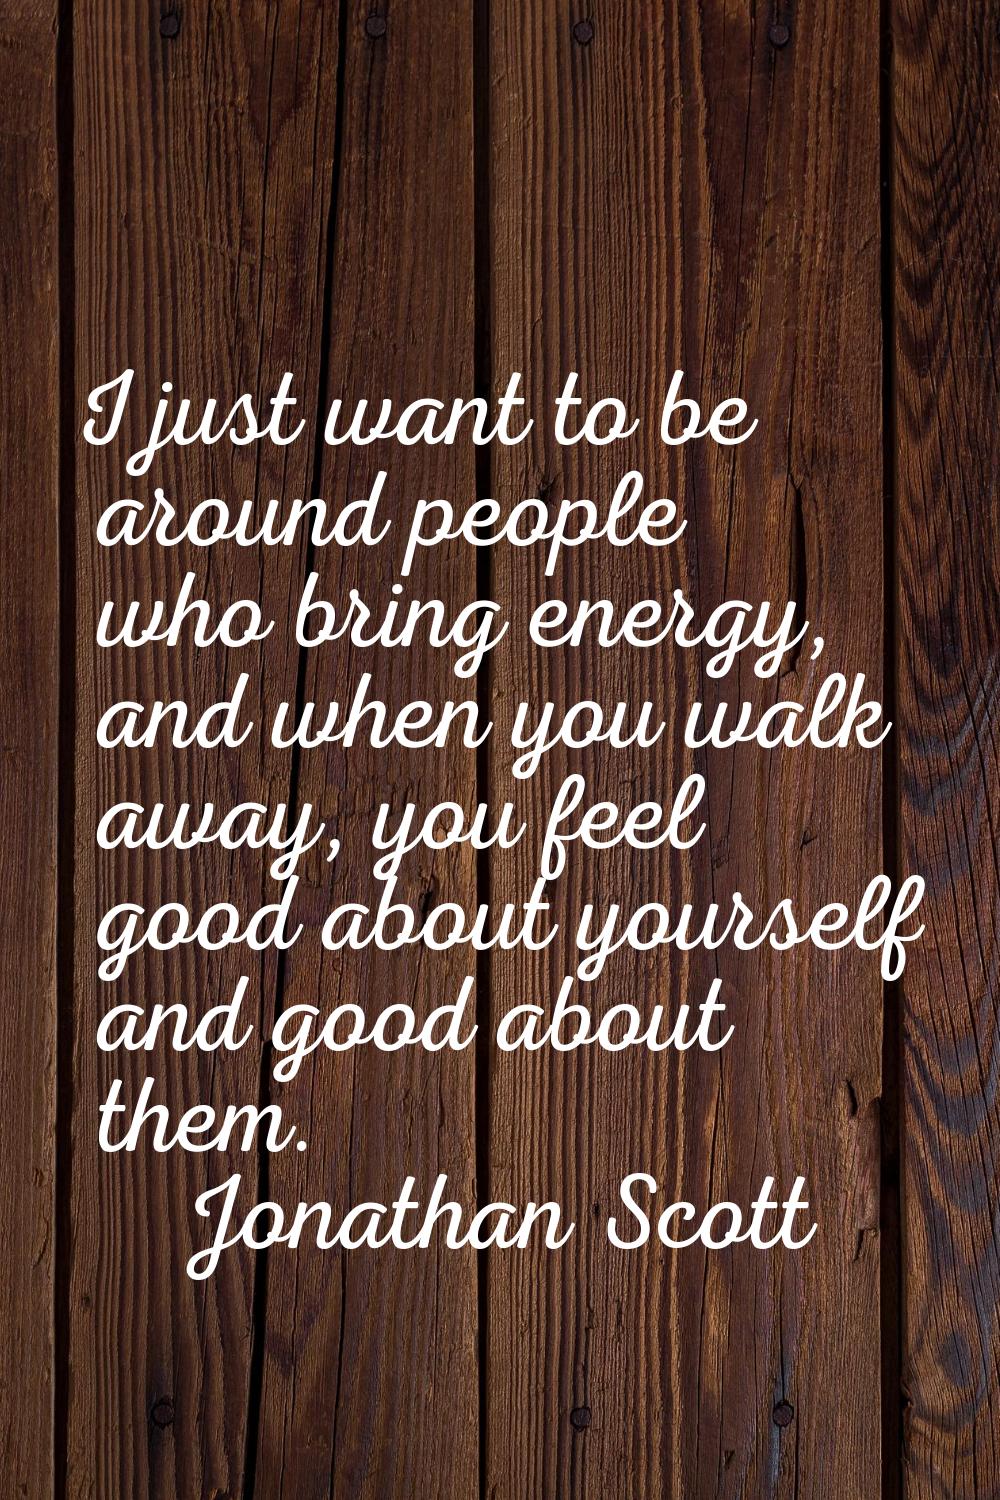 I just want to be around people who bring energy, and when you walk away, you feel good about yours